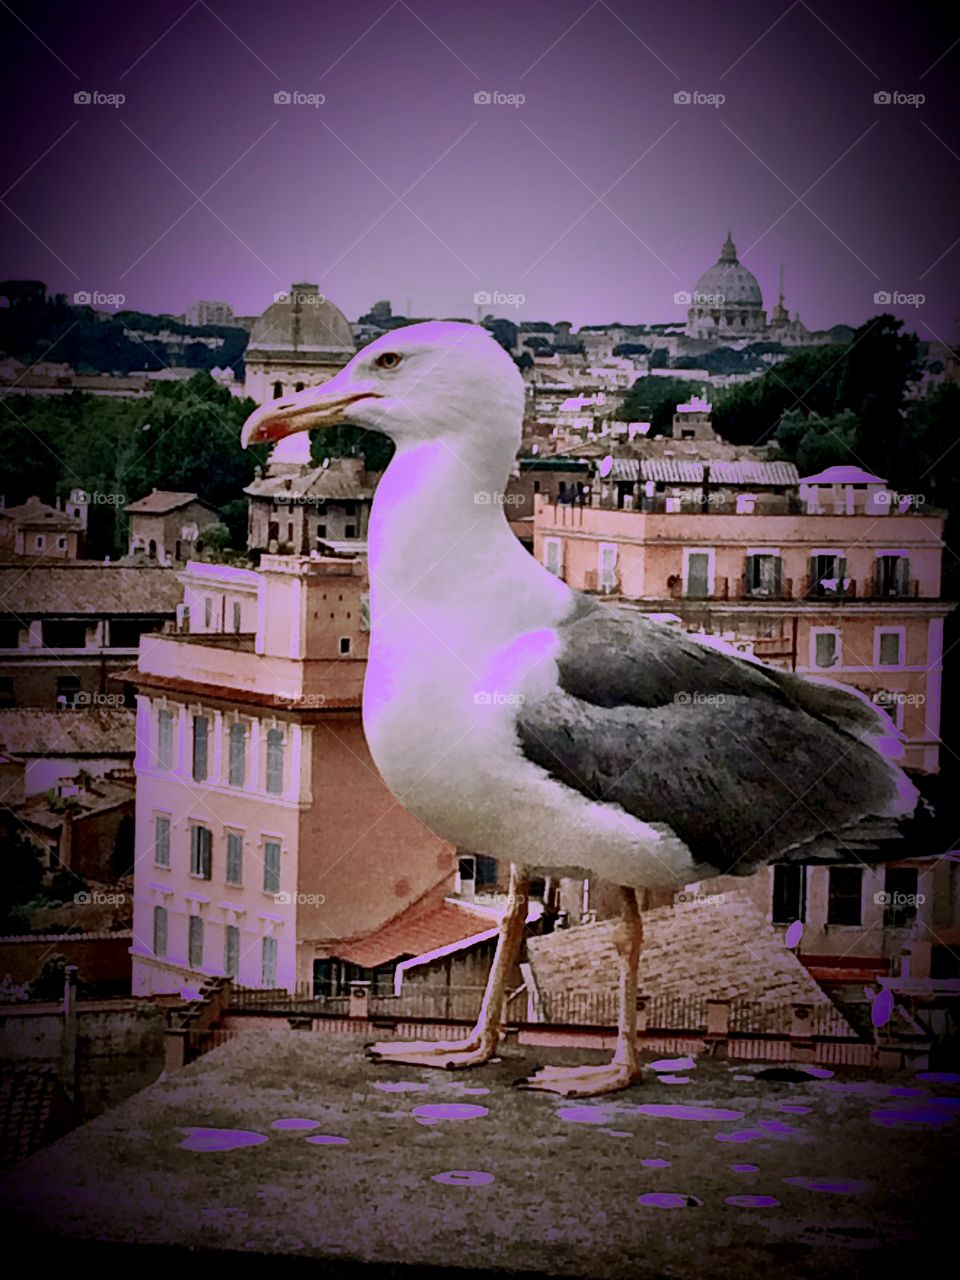 Rome, Italy with a seagull friend 